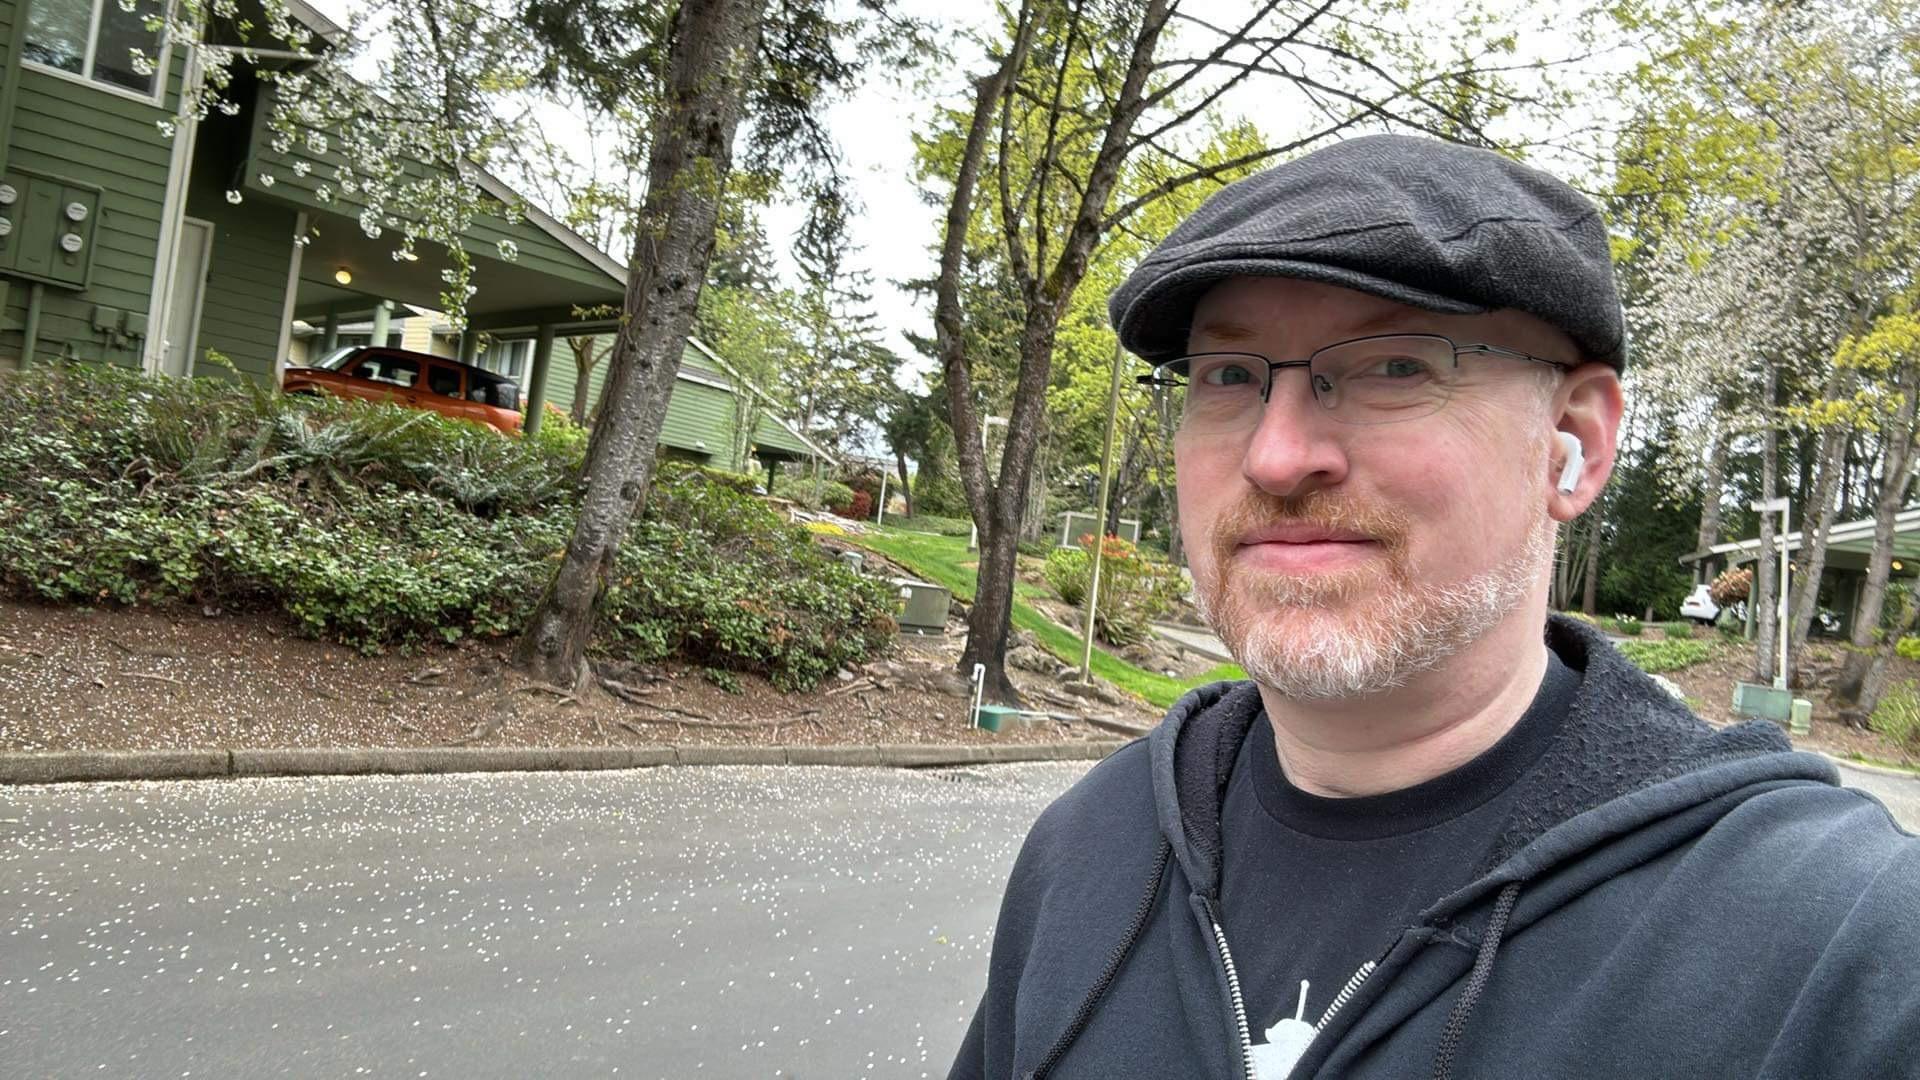 Me outside in our neighborhood, in front of trees, bushes, and green-painted buildings, wearing a t-shirt, hoodie, hat, and with Apple AirPods in my ears.